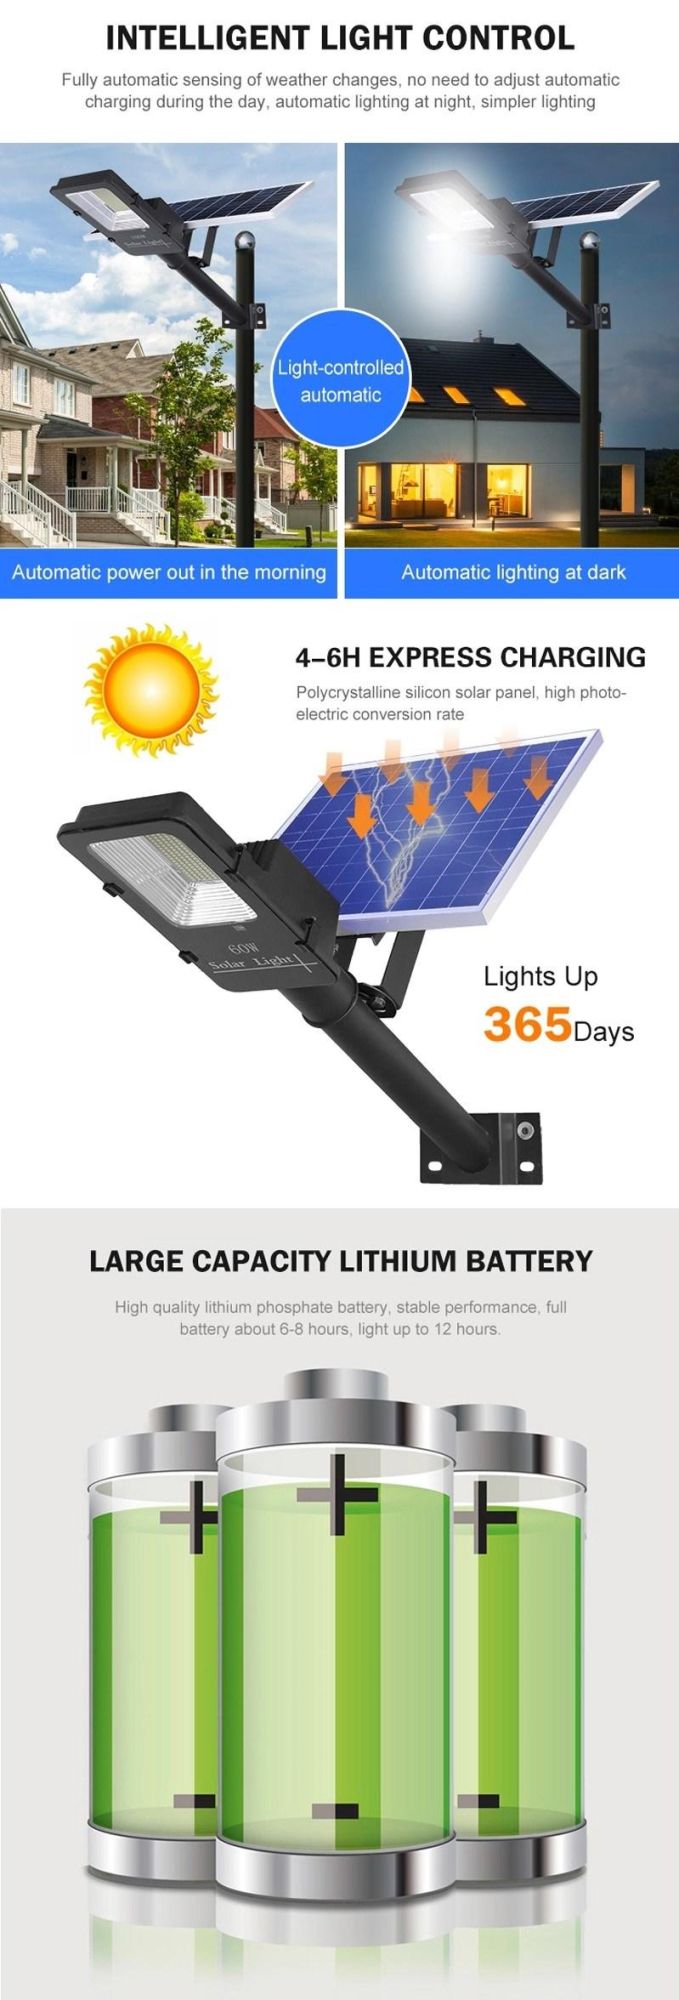 60W Outdoor Solar Wall Street Lamp RoHS LED Lights,Intelligent Control Light and Remote Control Park Lighting,100W 150W 200W Seprate LED and Solar Street Light